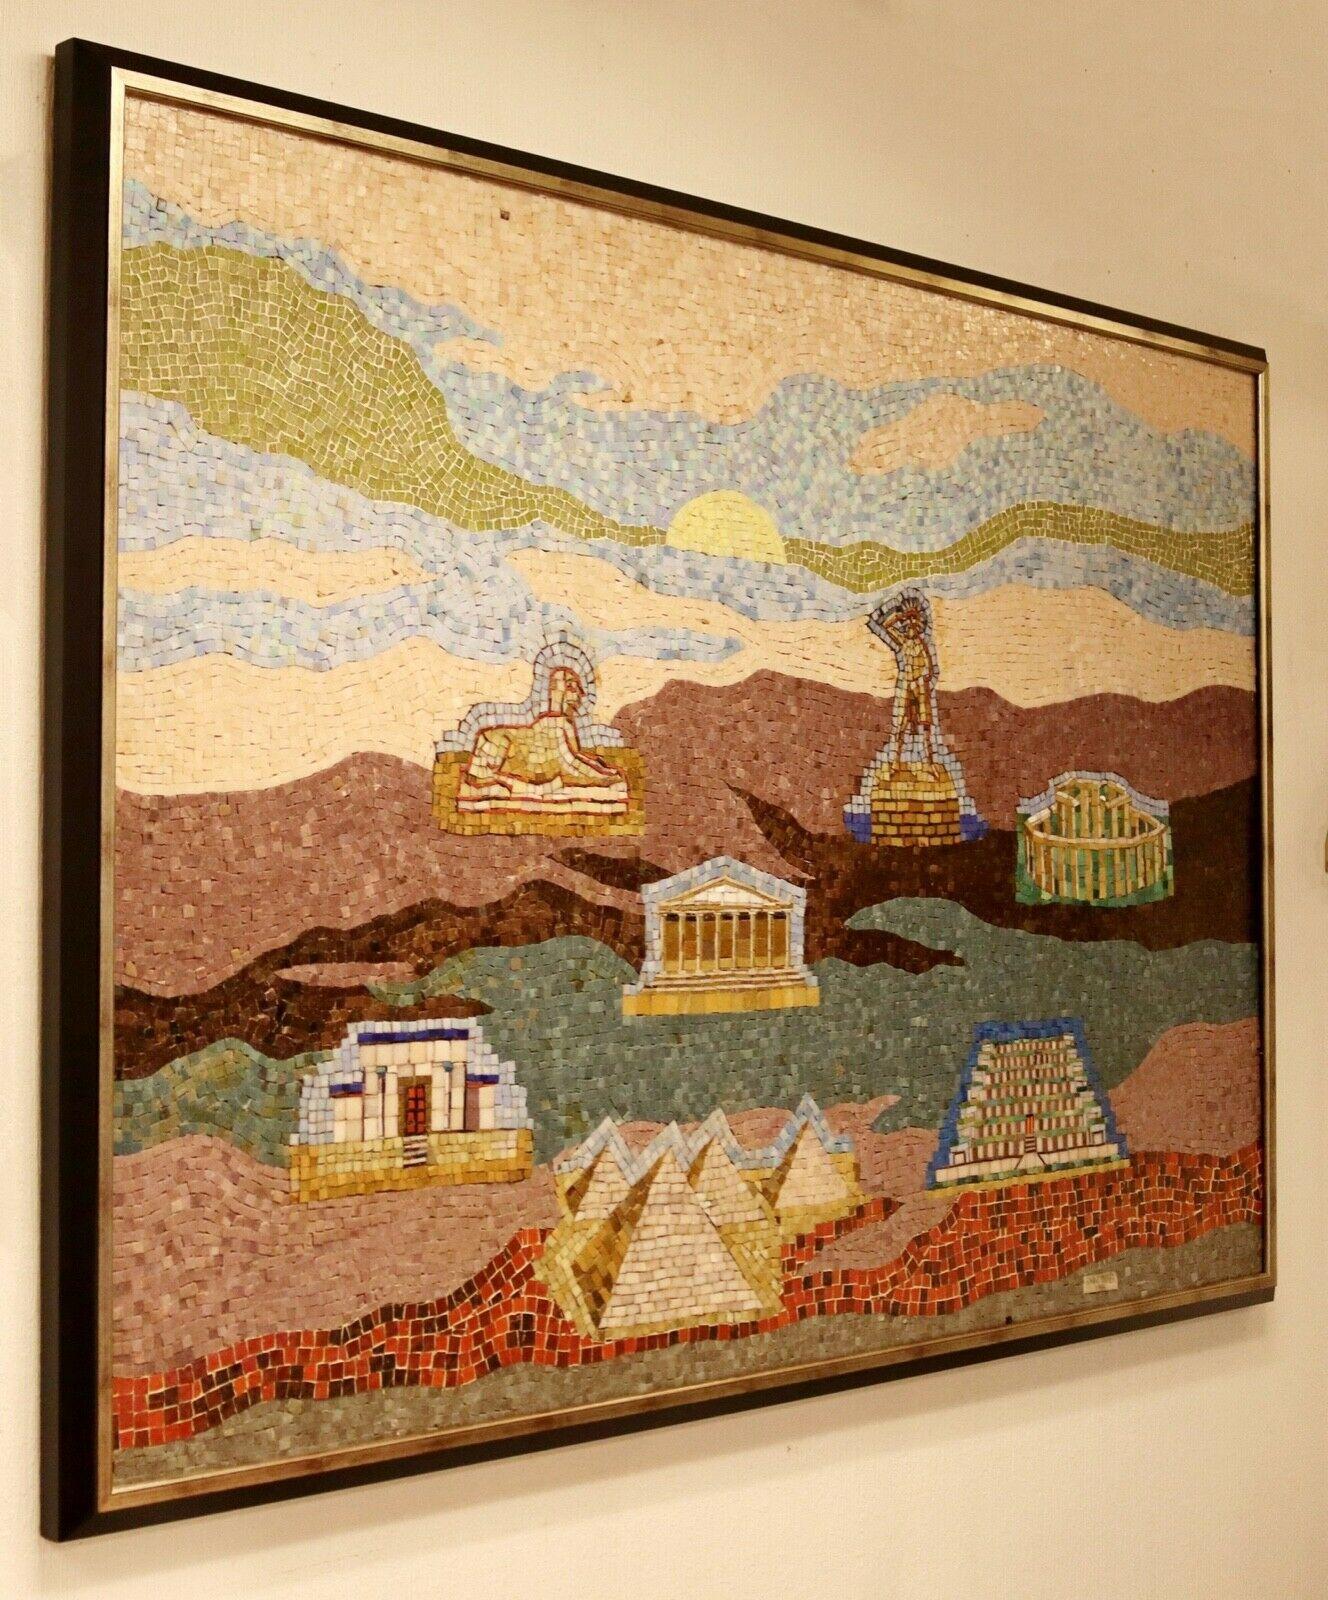 For your consideration is a monumental mosiac mural of world wonders made in 1986 by Michigan artist Edgar Louis Yaegar (51x74). Edgar Louis Yaeger was an American modernist painter from Detroit, Michigan. Yaeger studied under Robert A. Herzberg at